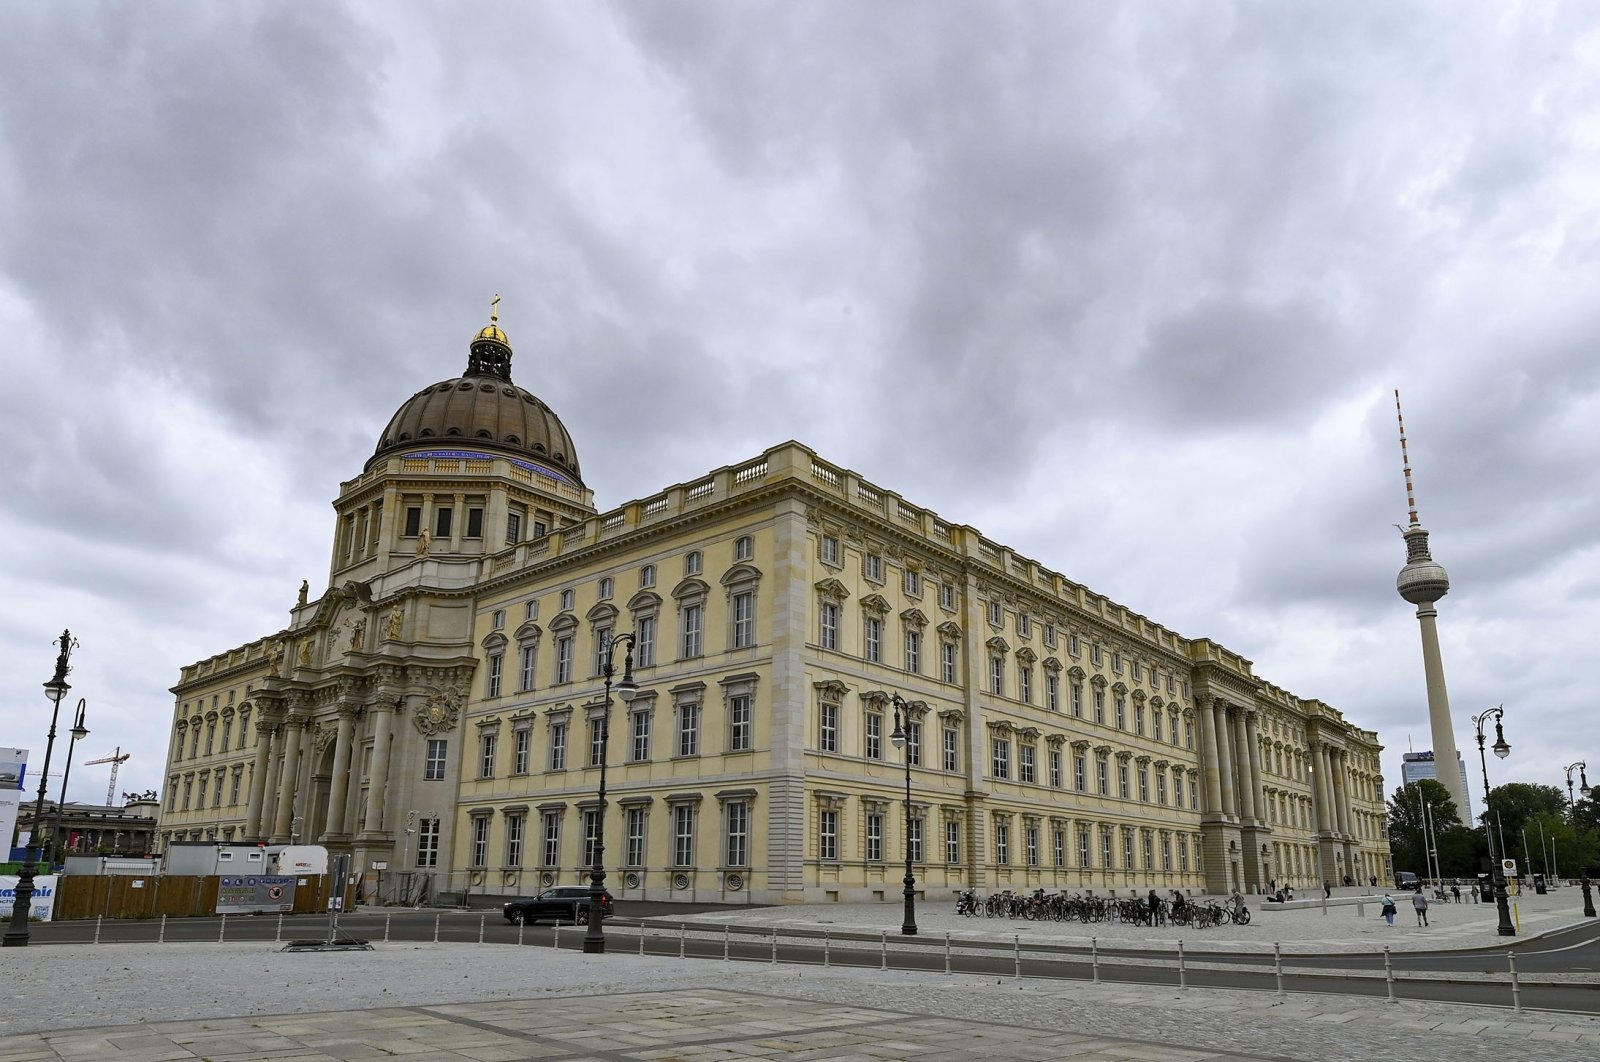 The building of the Humboldt Forum at the presentation day before the official opening in Berlin, Germany, July 19, 2021. (dpa via AP)